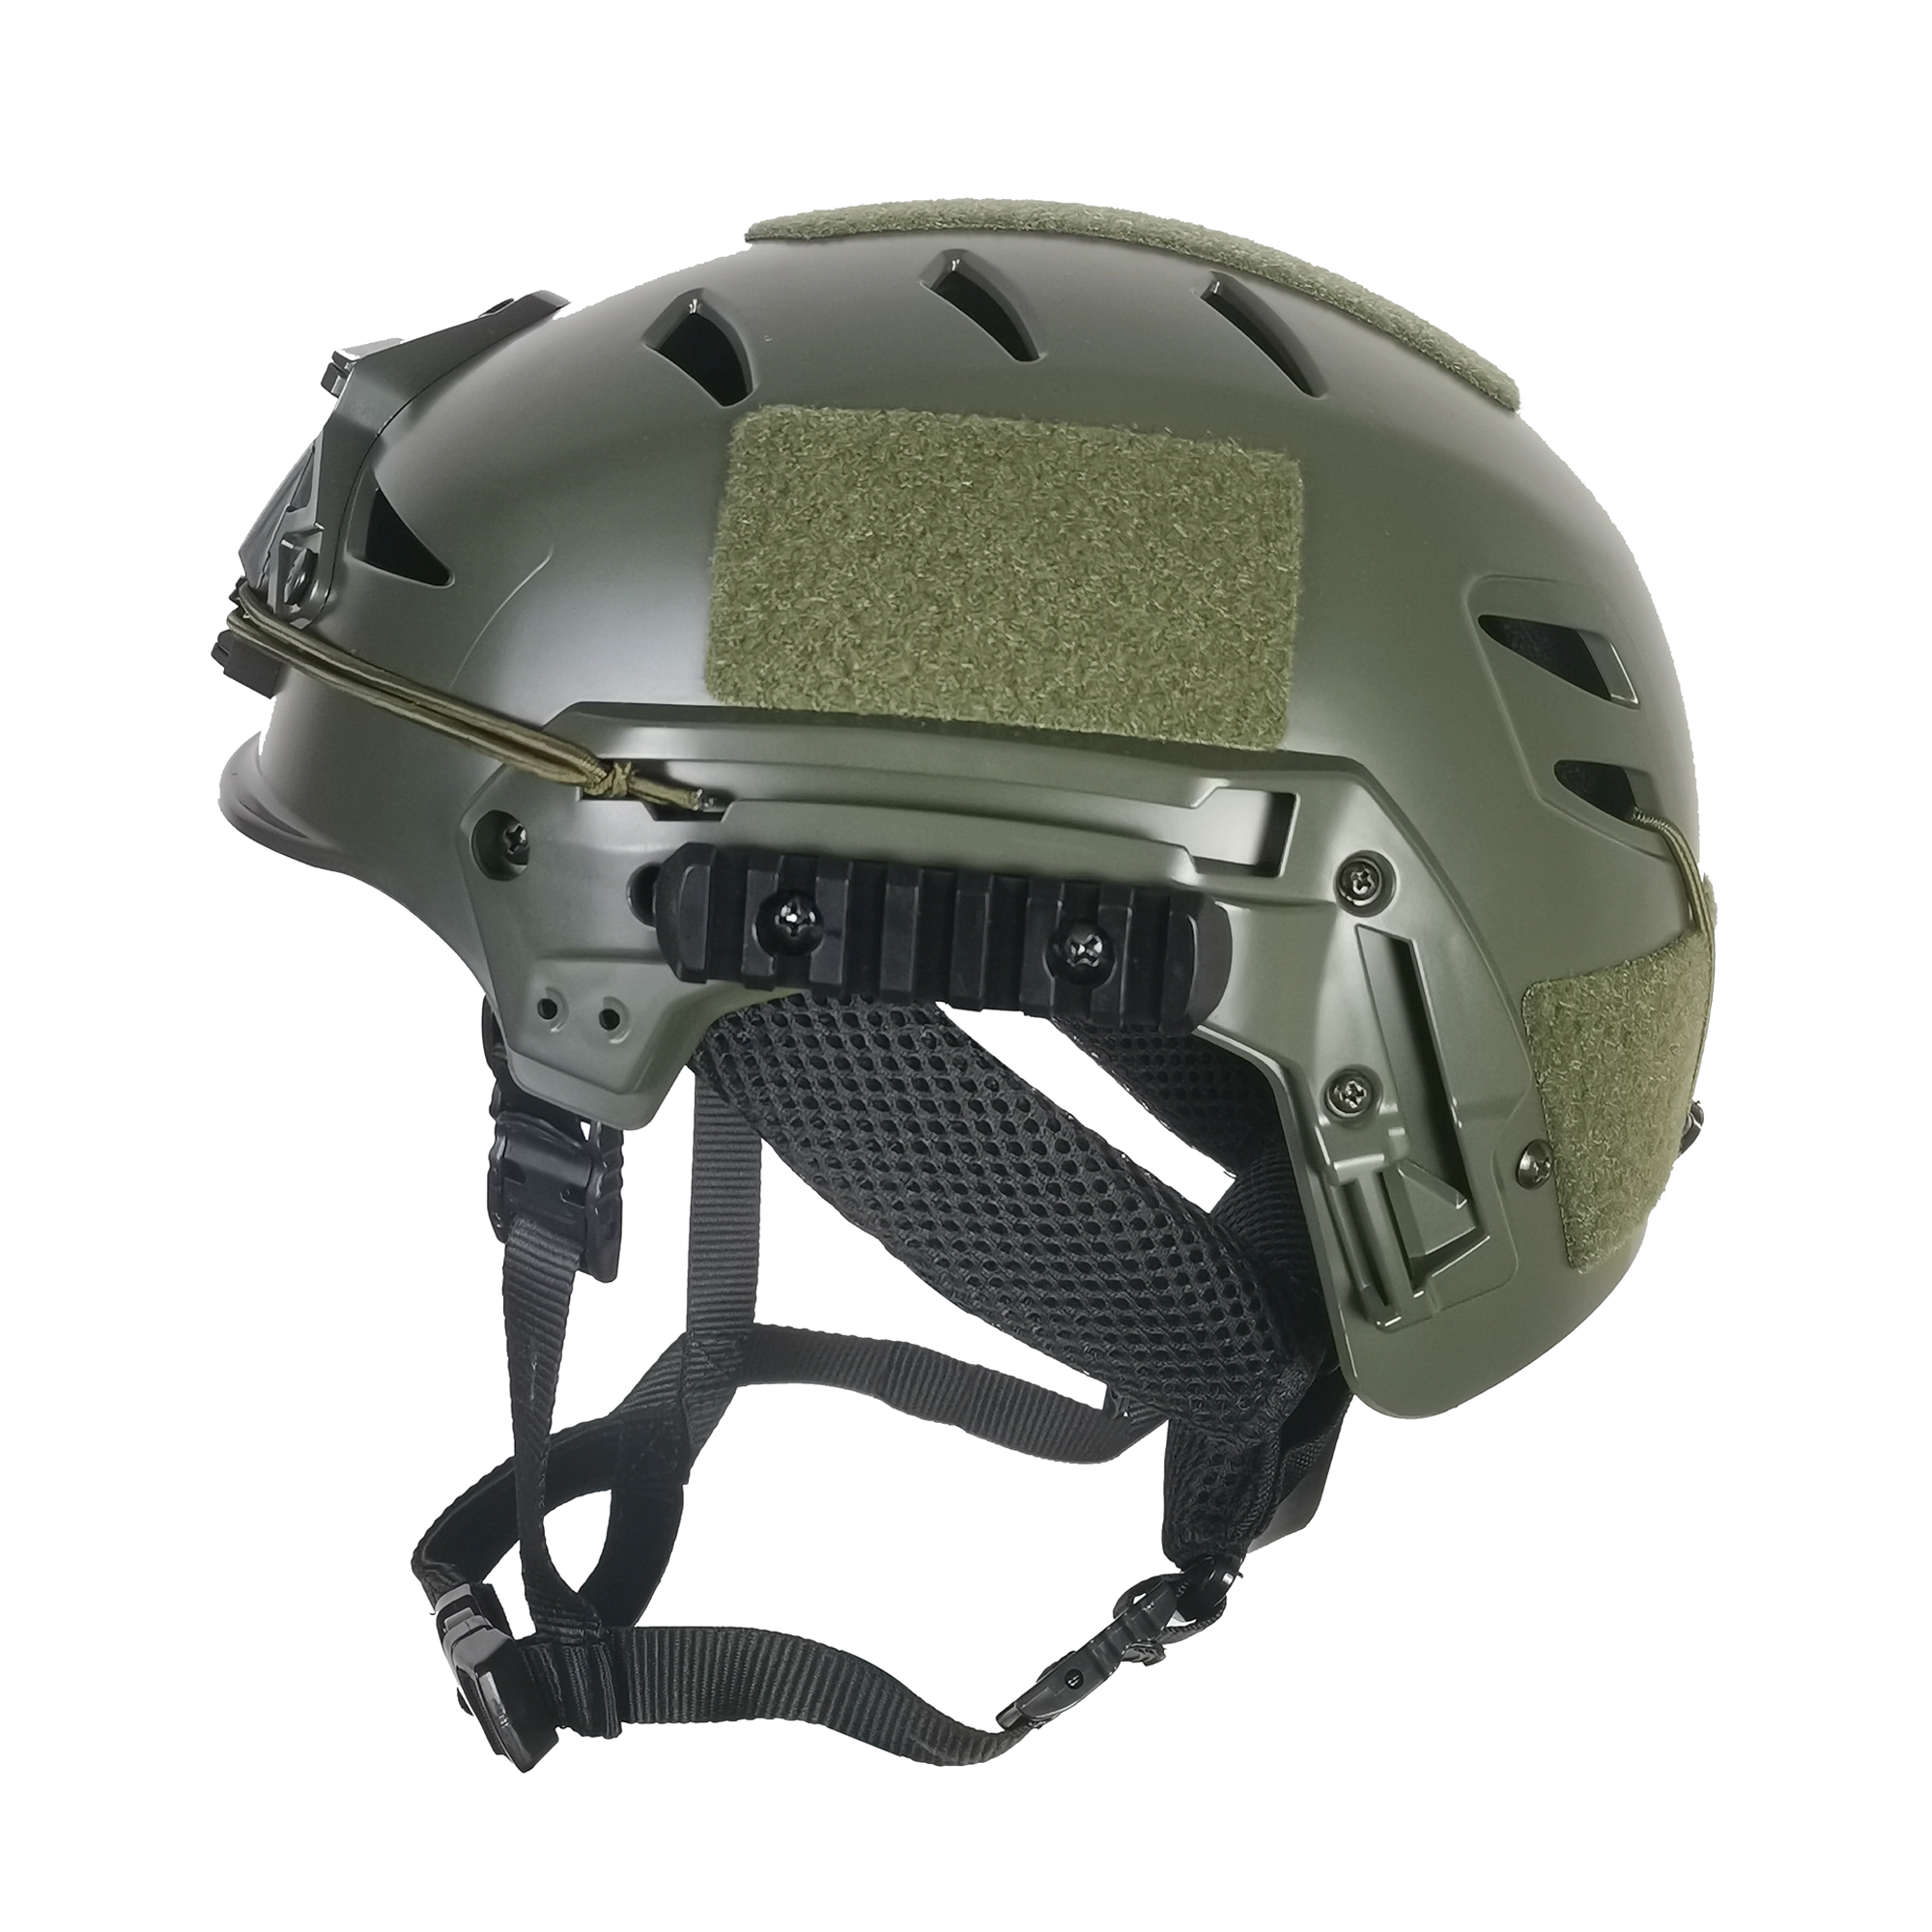 Top Black Military Helmets for Ultimate Protection on the Field